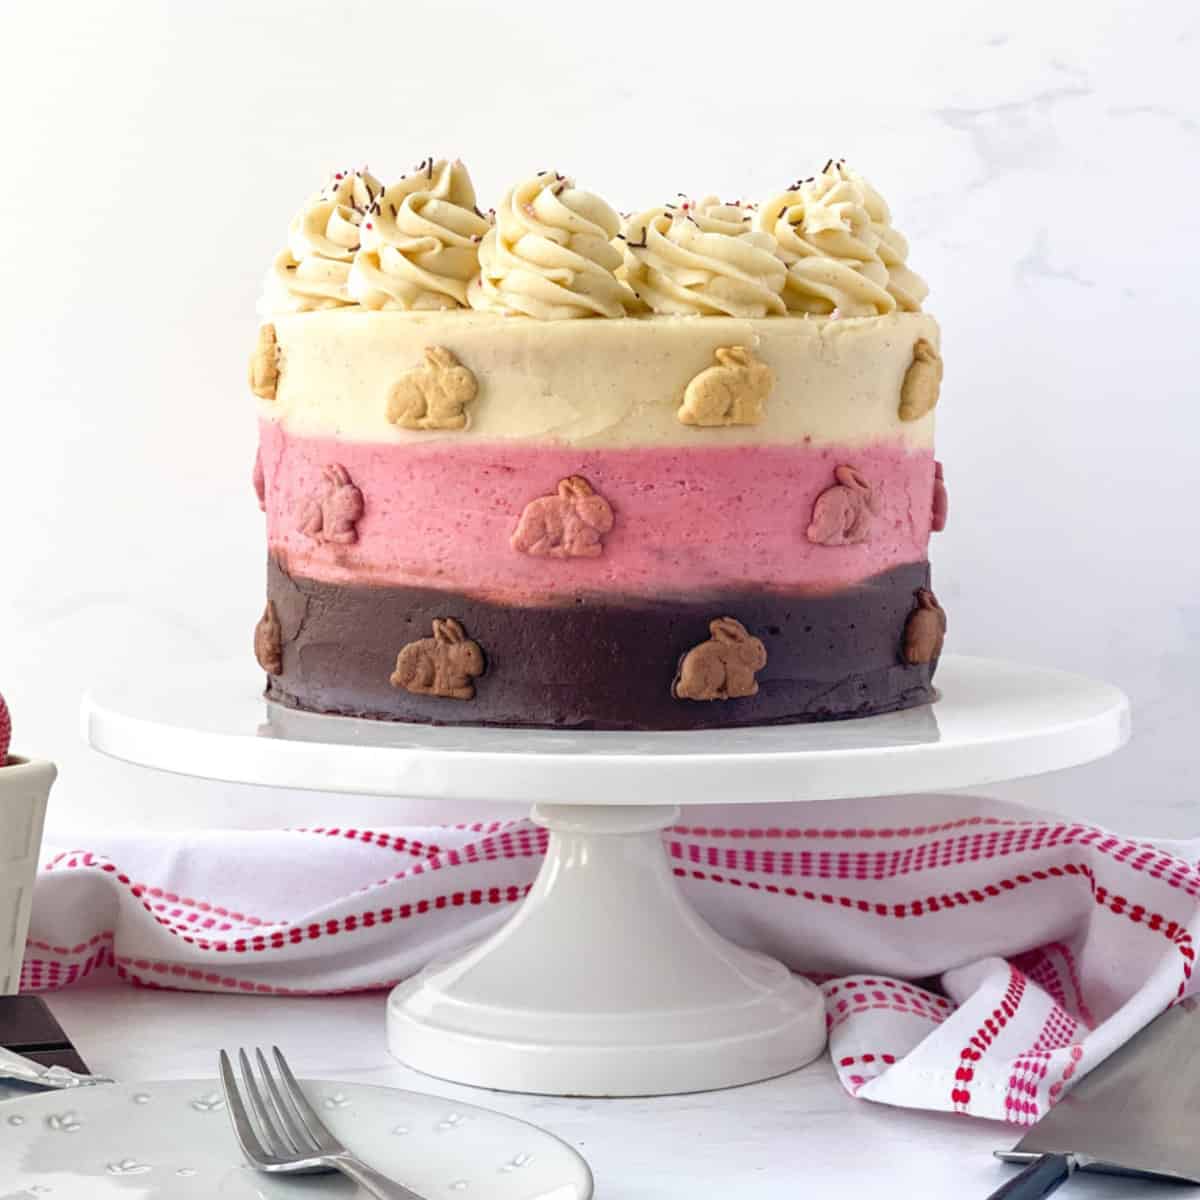 Neapolitan Cake with graham bunnies on the outside on a white cake stand.